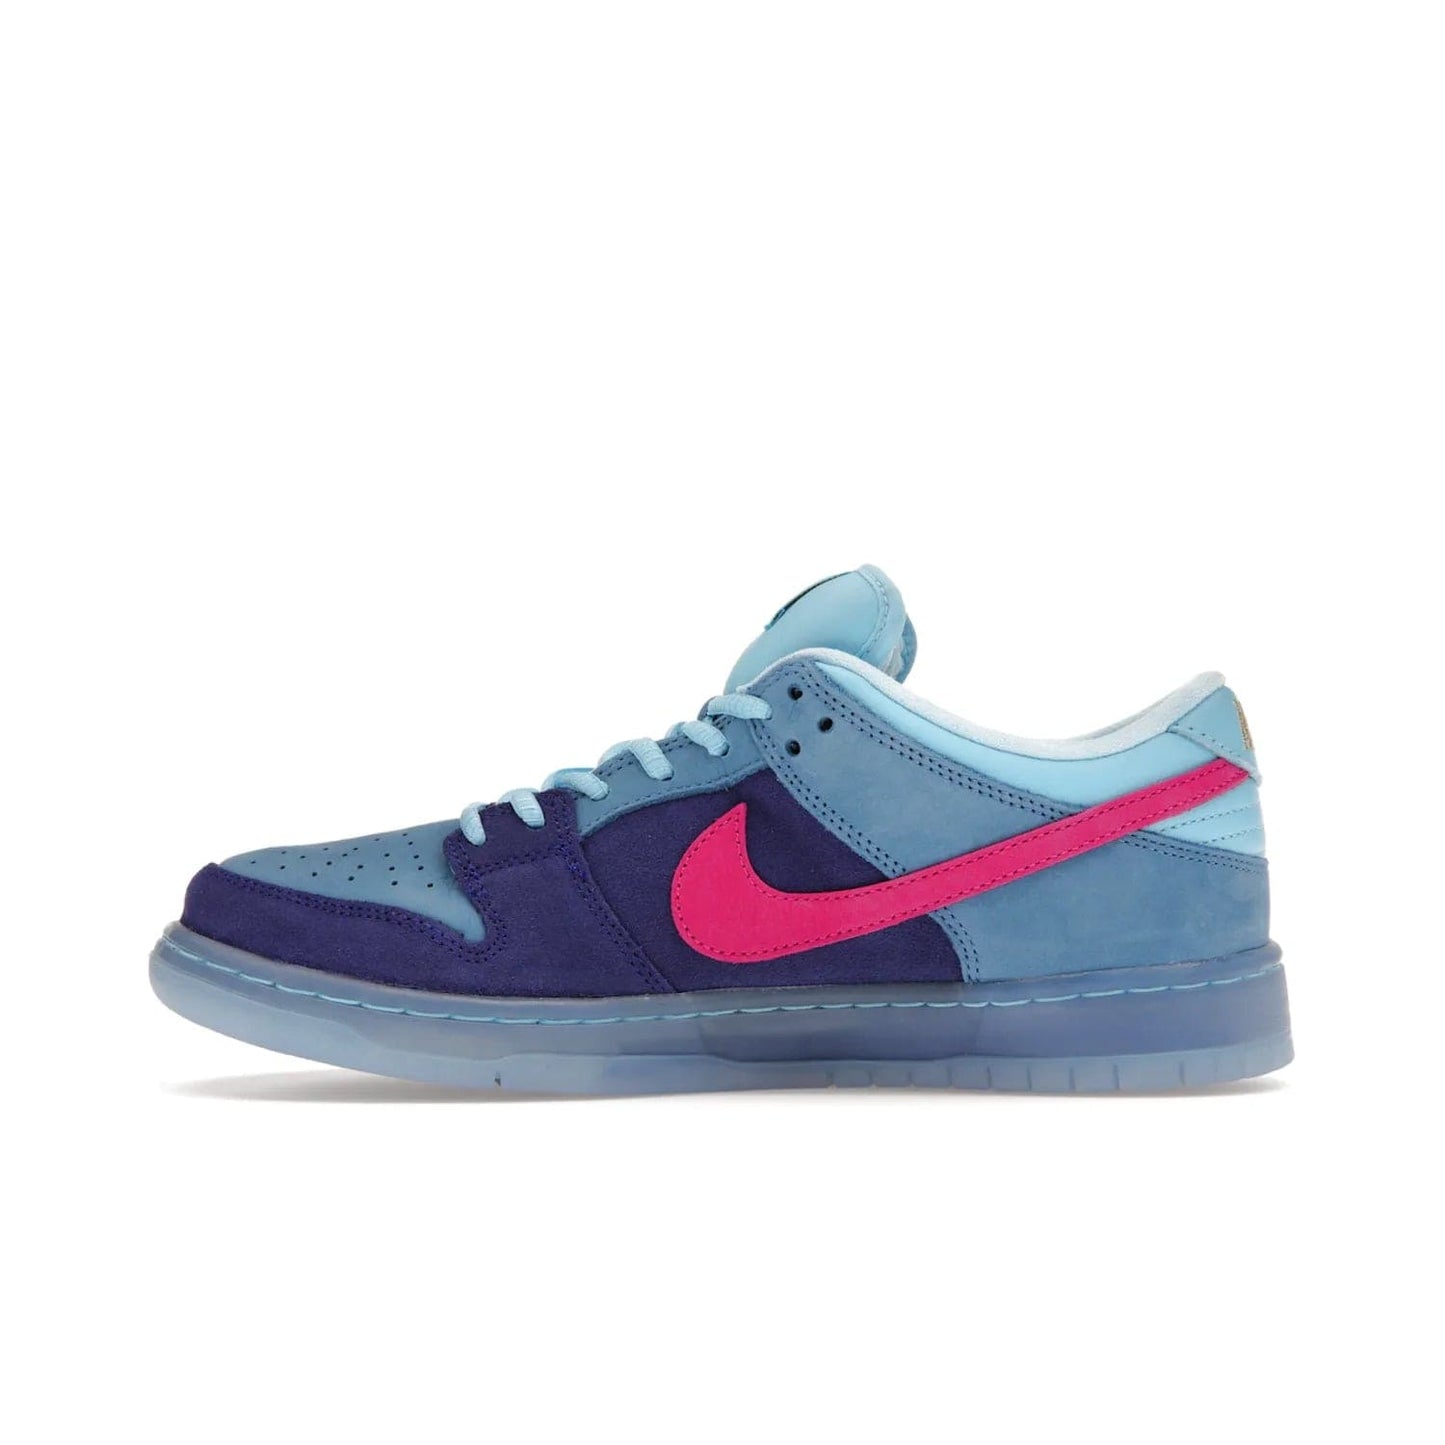 Nike SB Dunk Low Run The Jewels - Image 19 - Only at www.BallersClubKickz.com - The Nike SB Dunk Low Run The Jewels pays tribute to the Run the Jewels 3 album cover. It features a blue suede upper with pink suede accents, gold branding and 3 lace sets. RTJ insoles complete this limited edition sneaker. Get it now for your shoe collection.